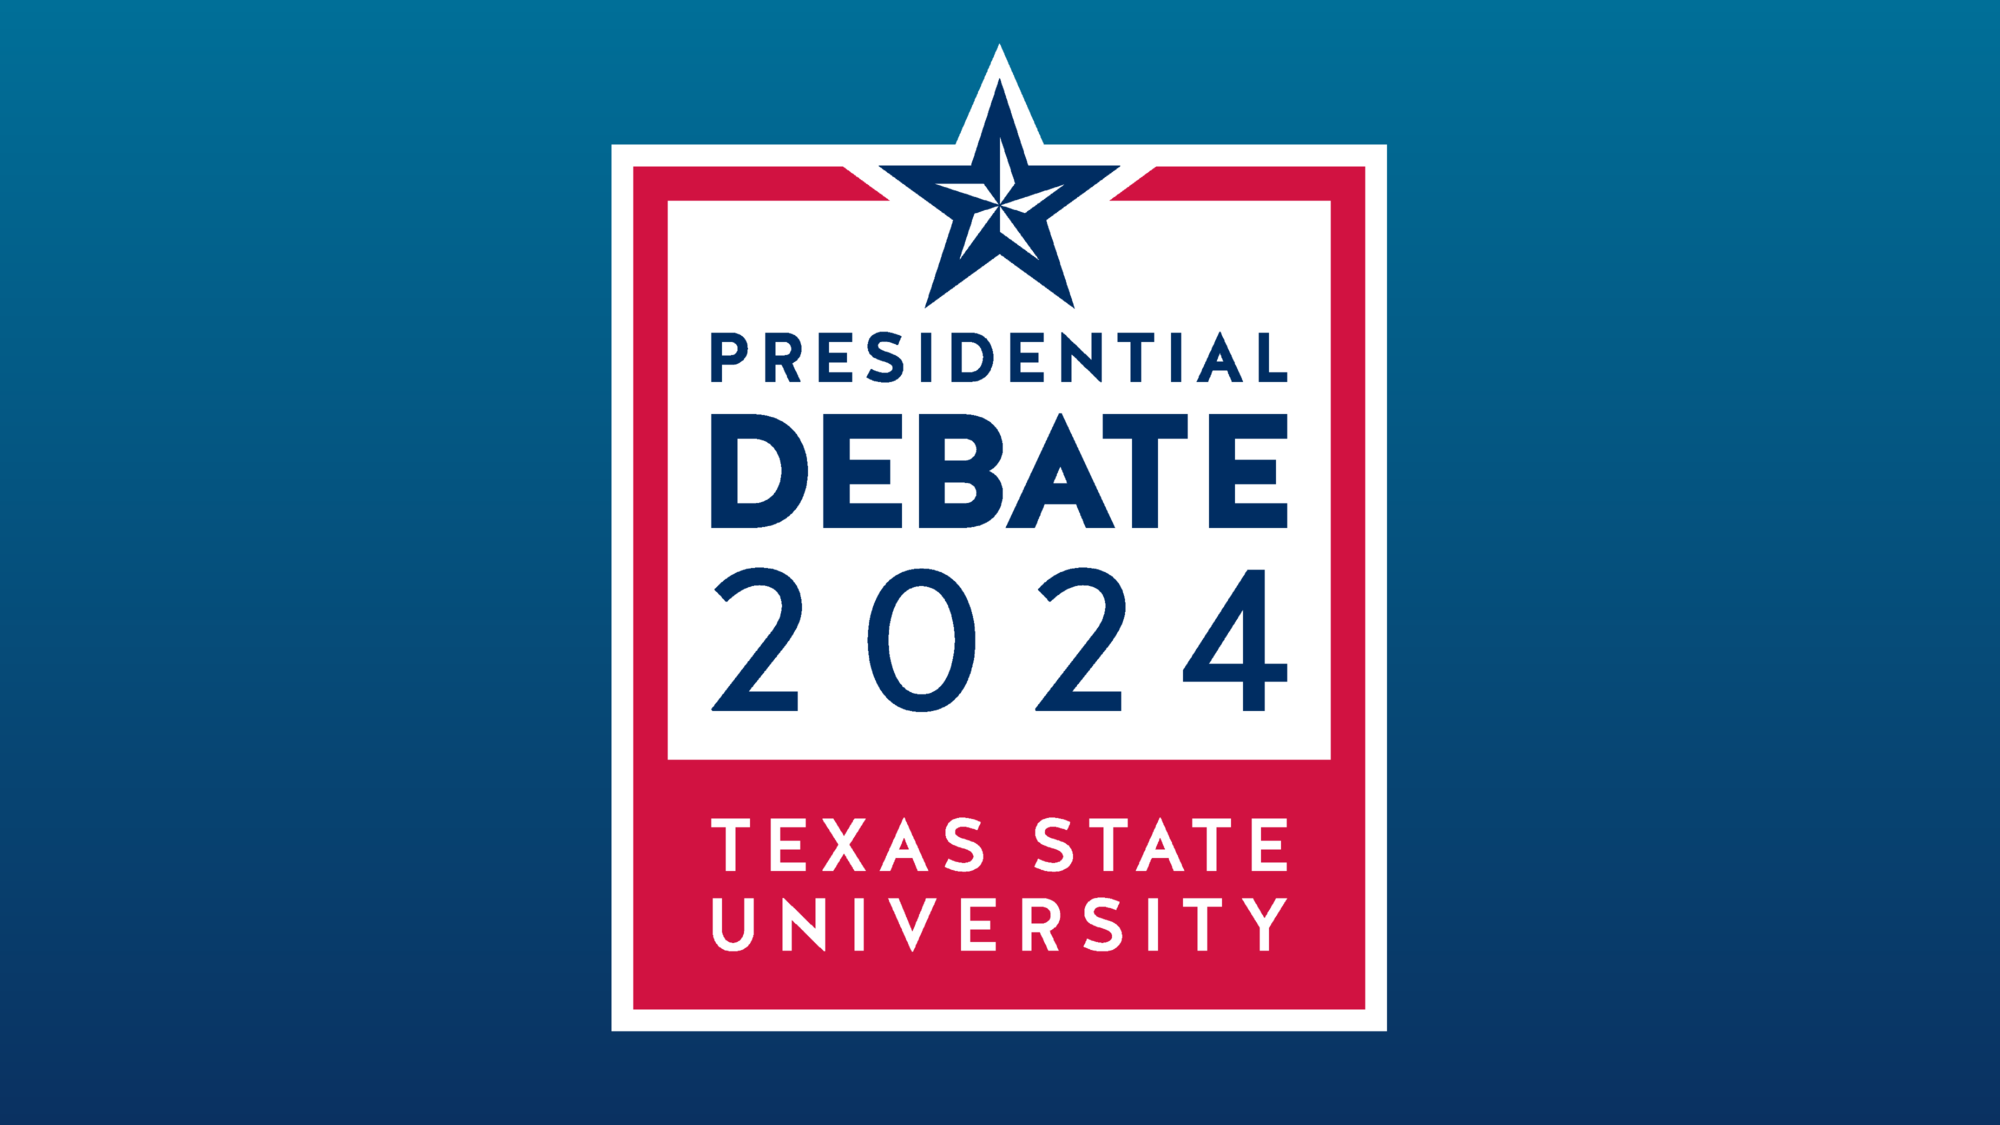 graphic on blue gradient background that reads "presidential debate 2024 texas state university"